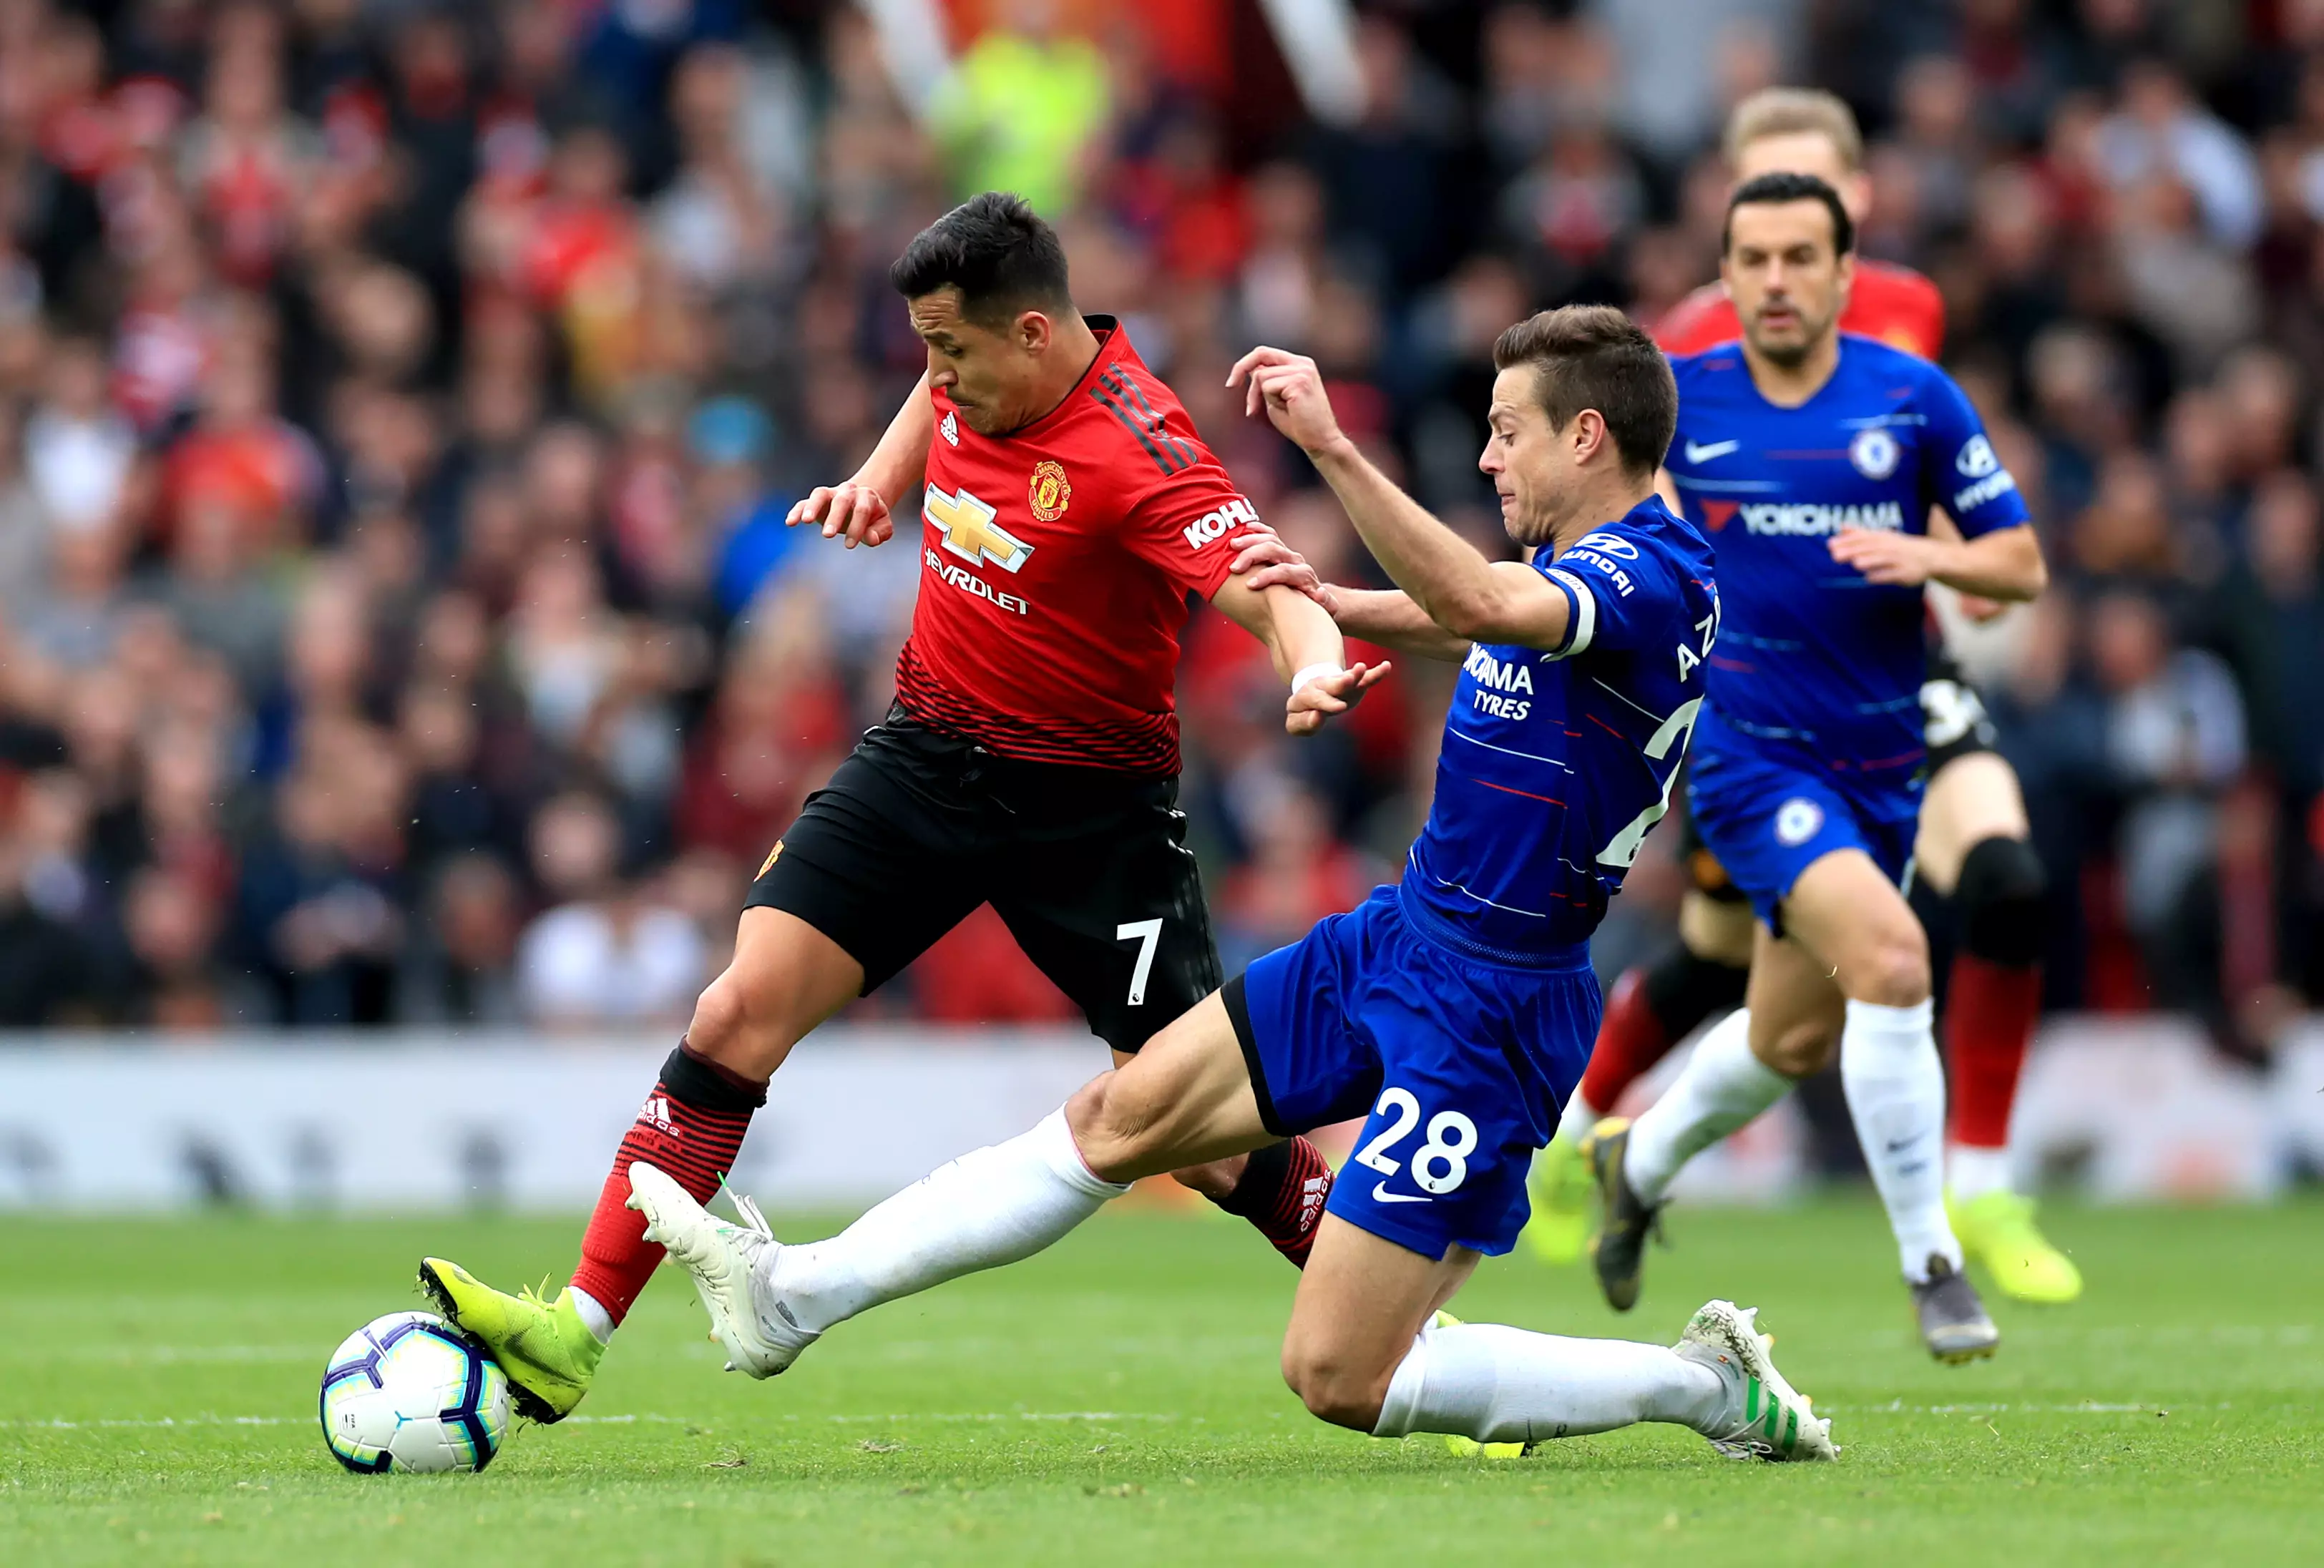 Proof that Alexis Sanchez touched the ball at least once against Chelsea. Image: PA Images